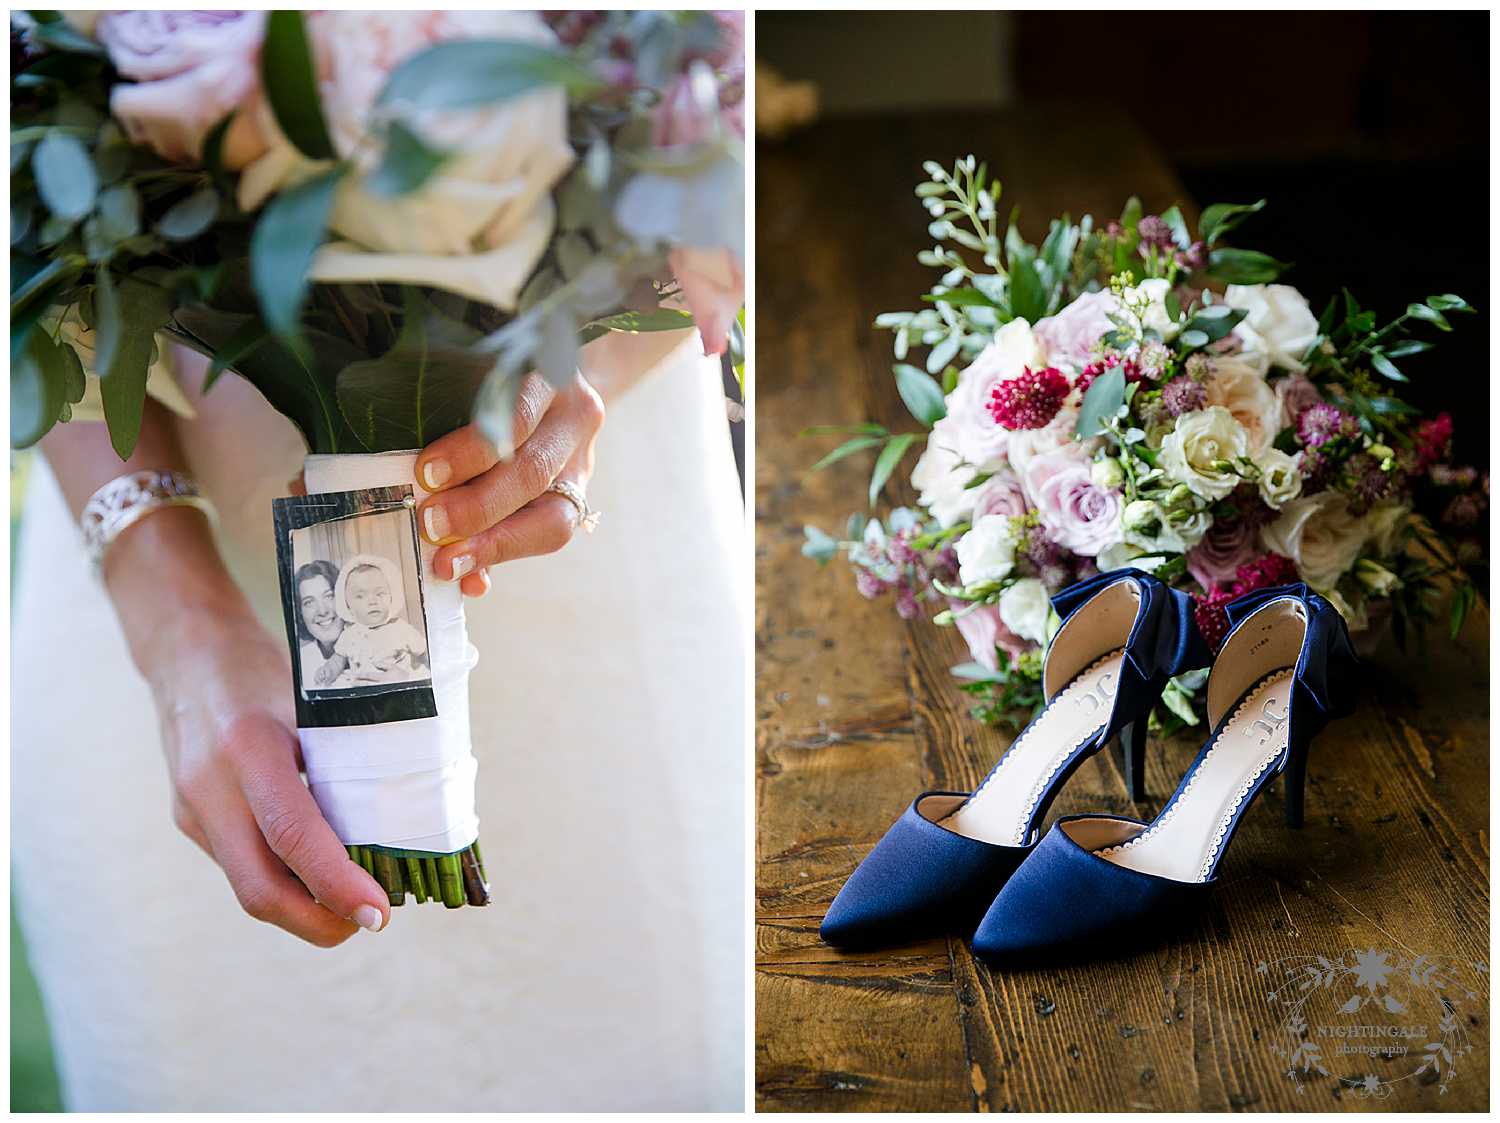 wedding details on bouquet and blue shoes